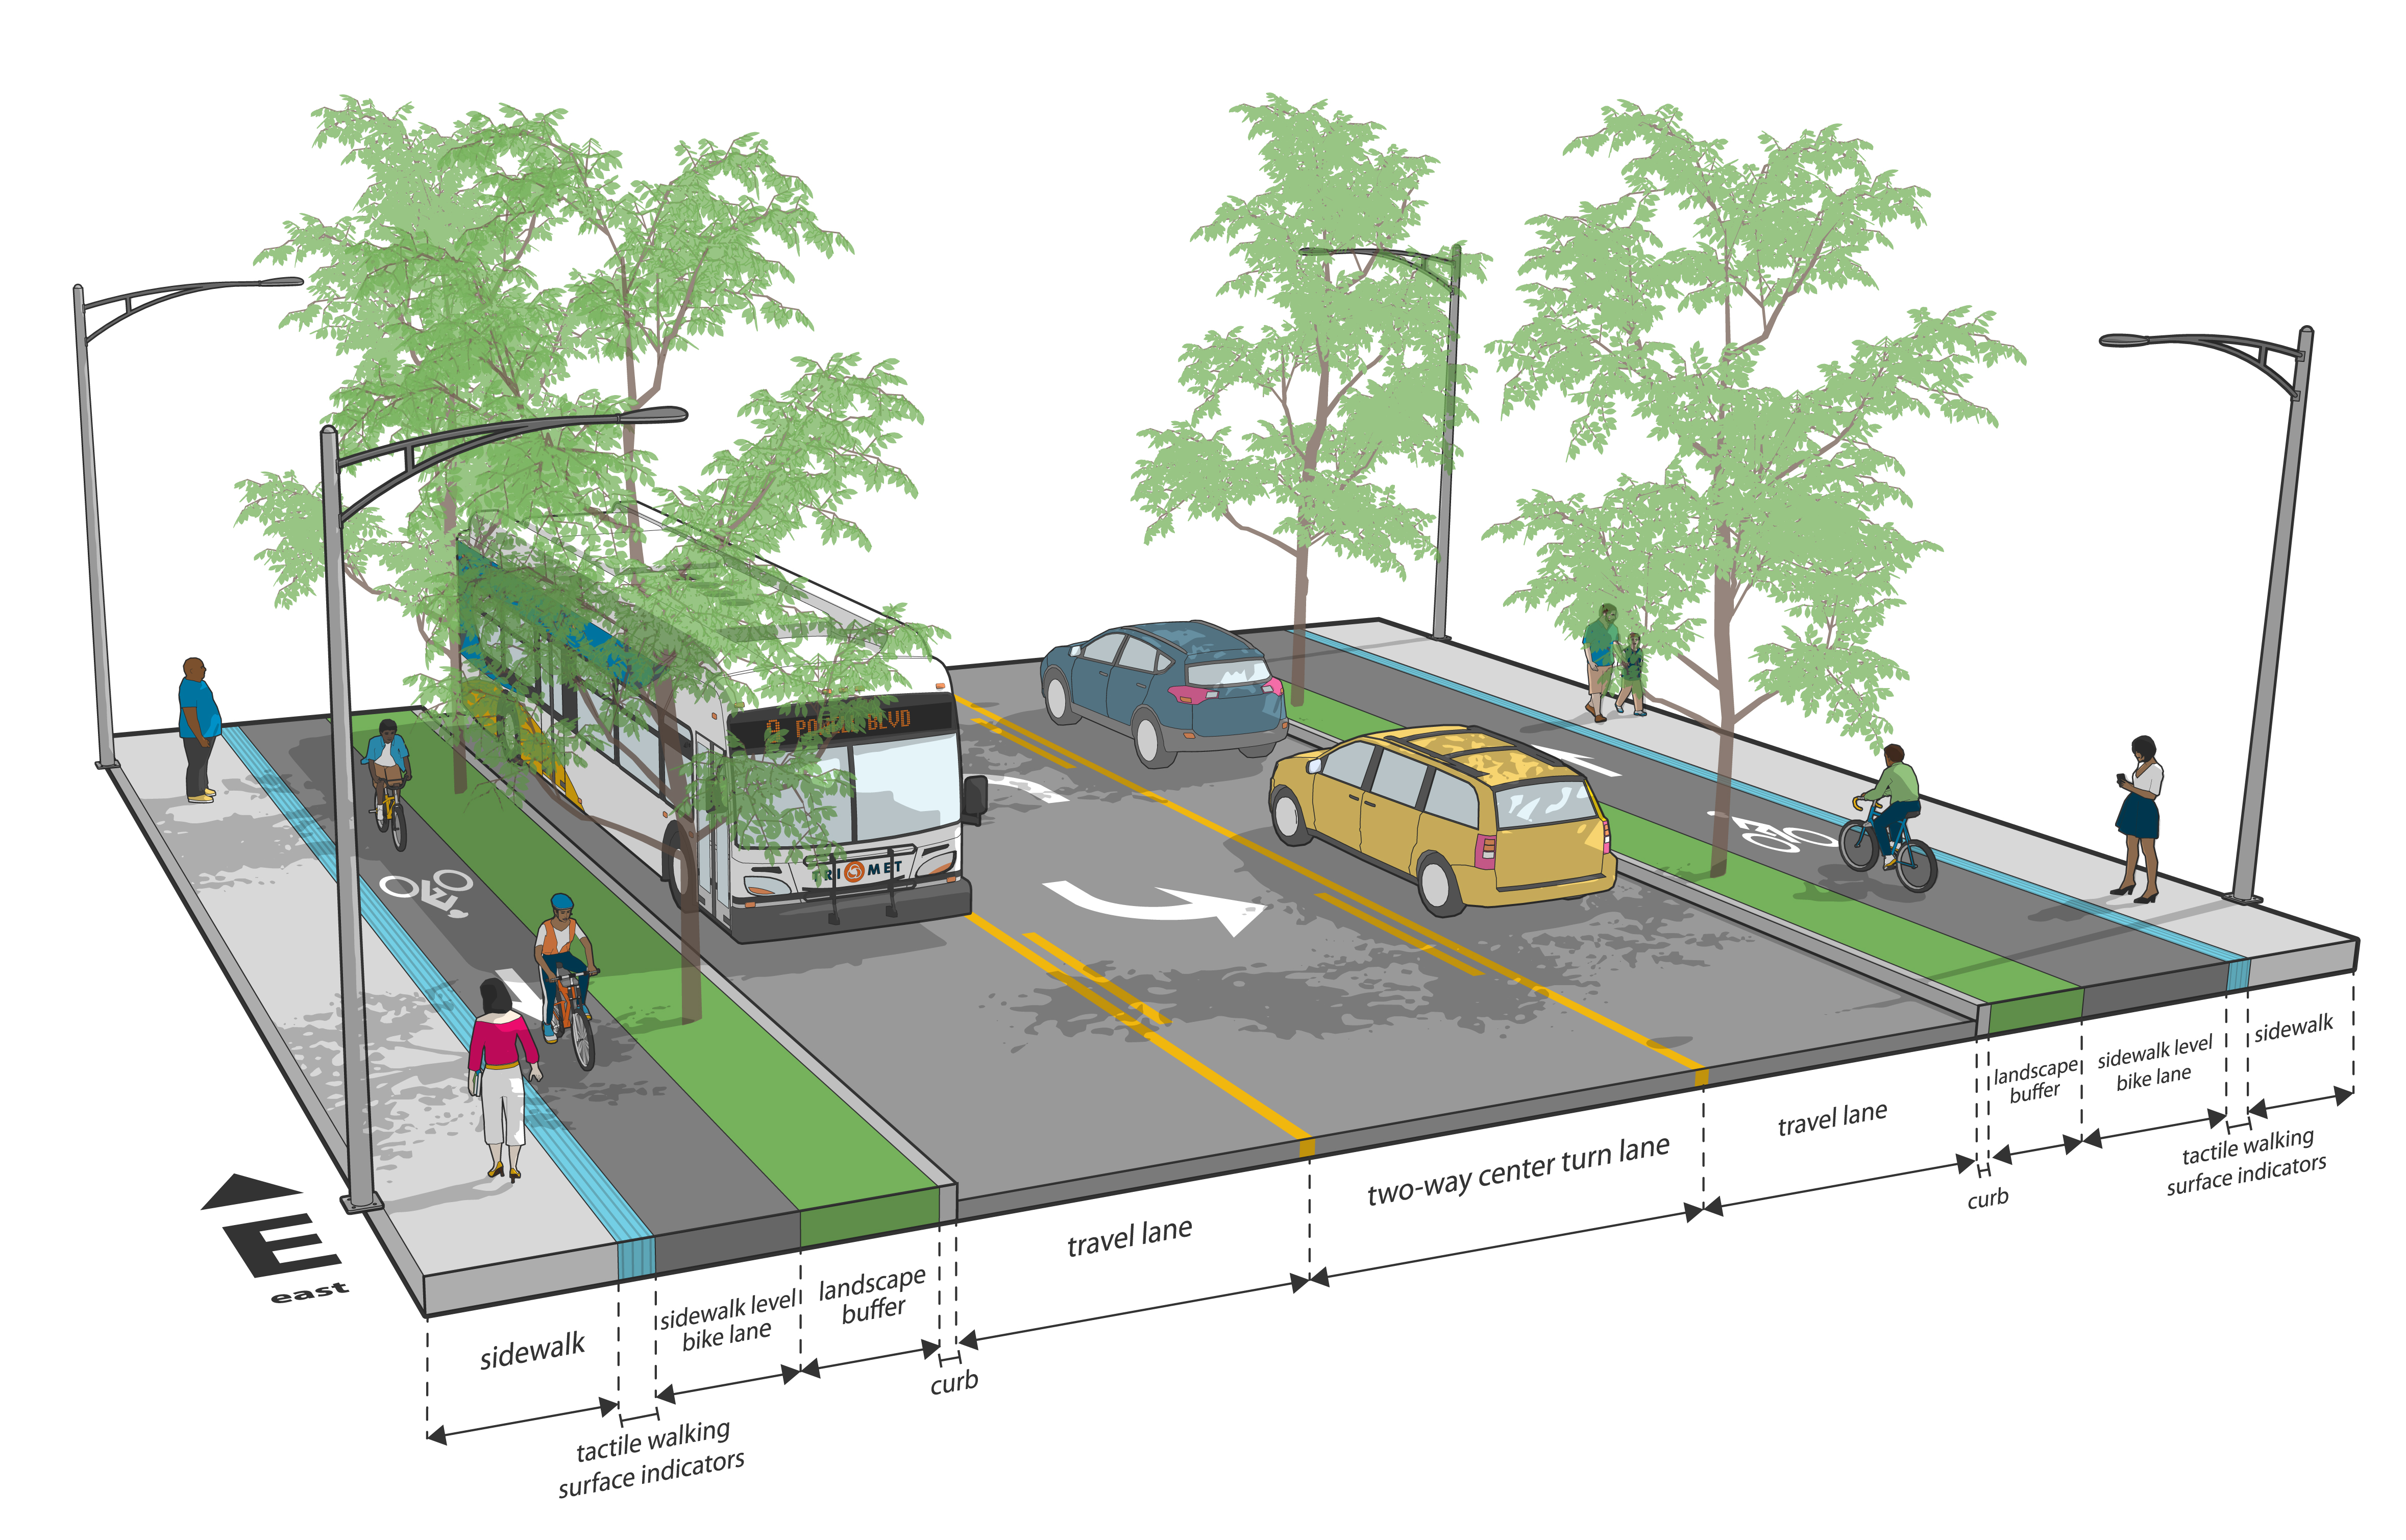 Example image of how Outer Southeast Powell Boulevard will look afer constrtuction.